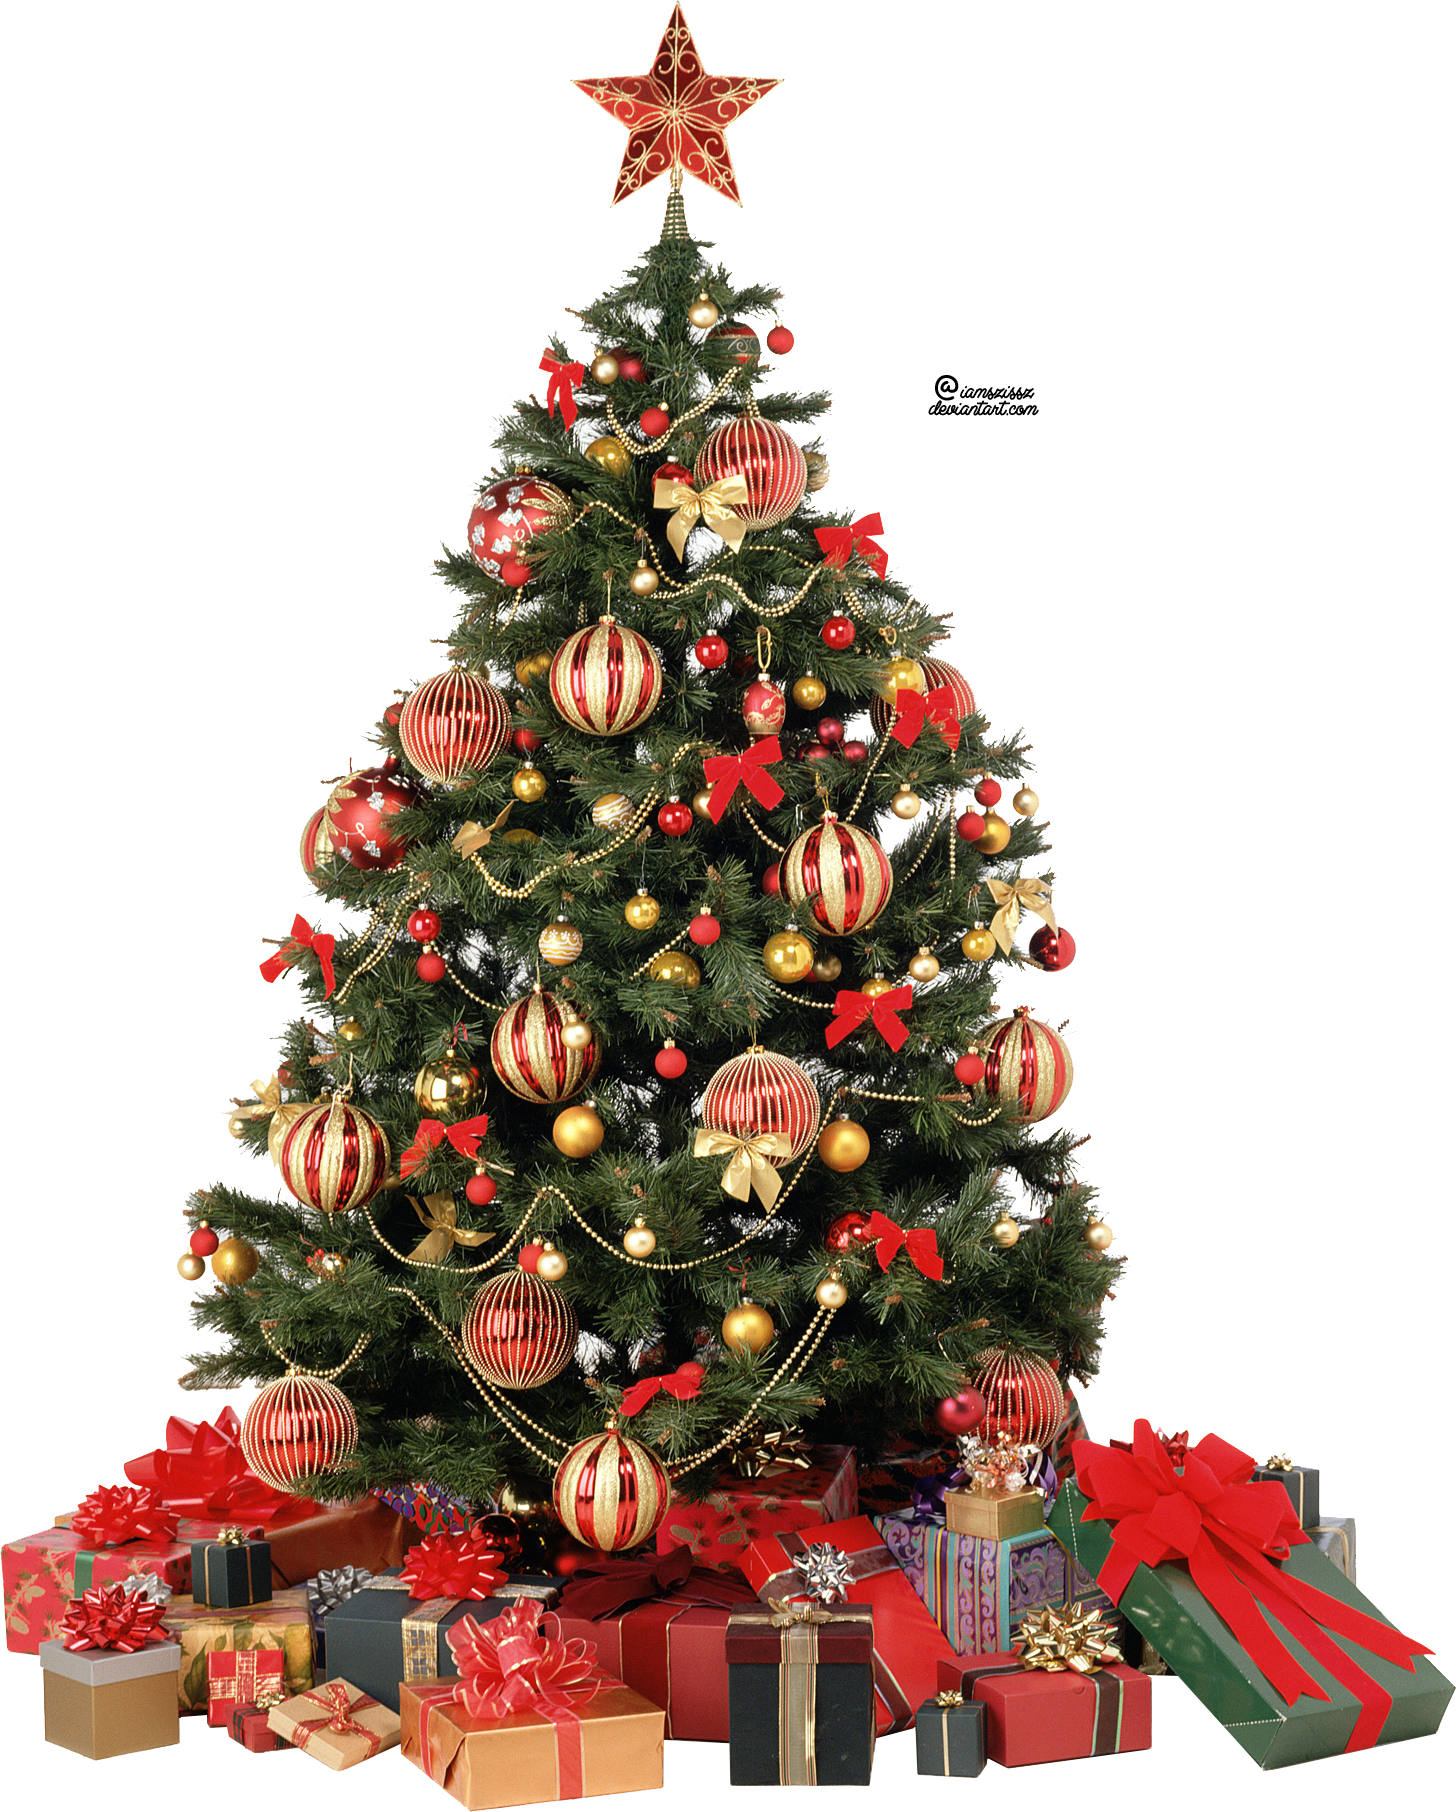 Download Christmas Tree Picture HQ PNG Image | FreePNGImg